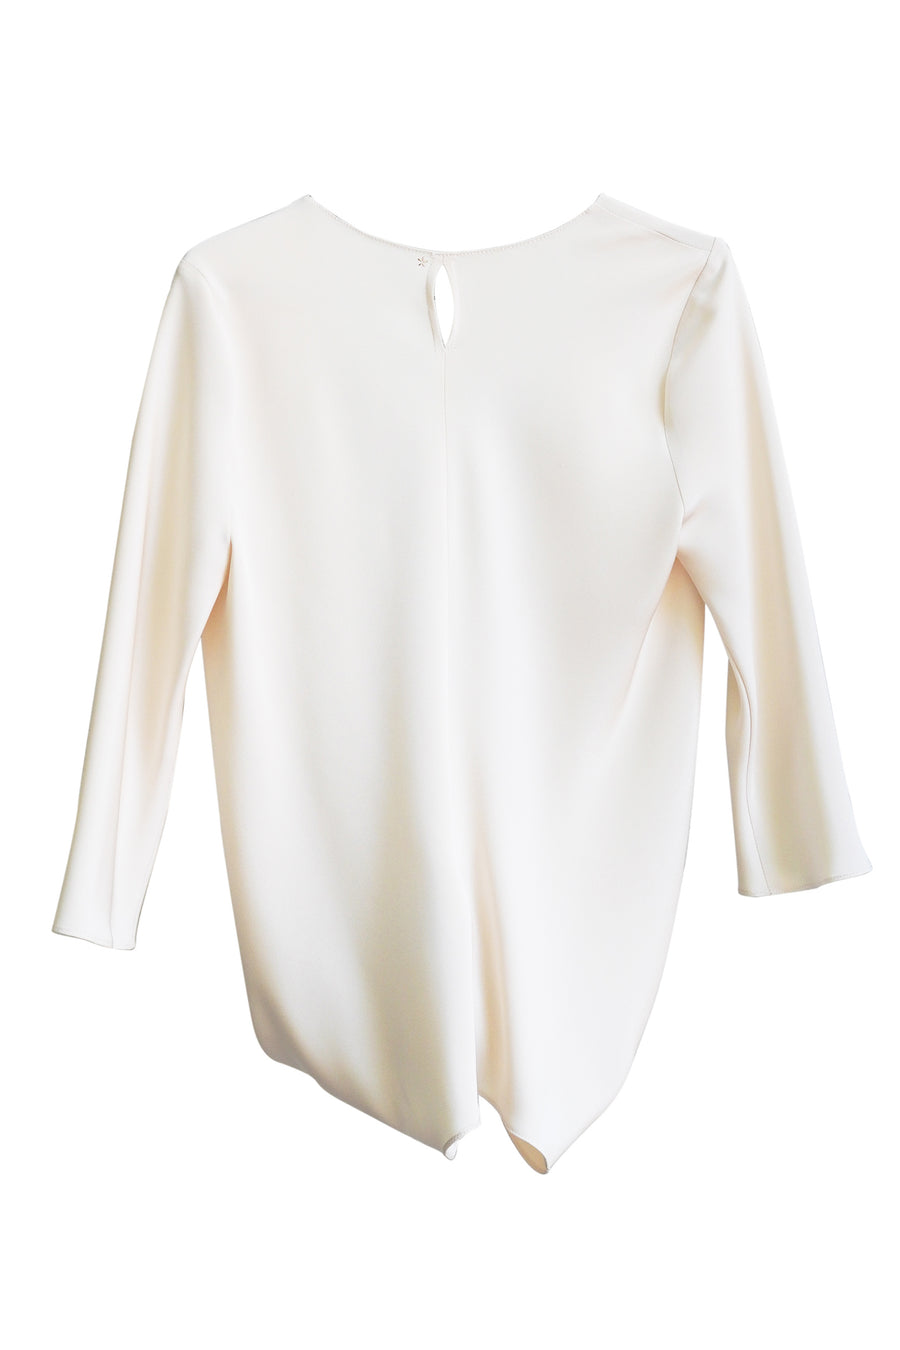 Champagne Silk 3/4 Sleeve Twist Front Top